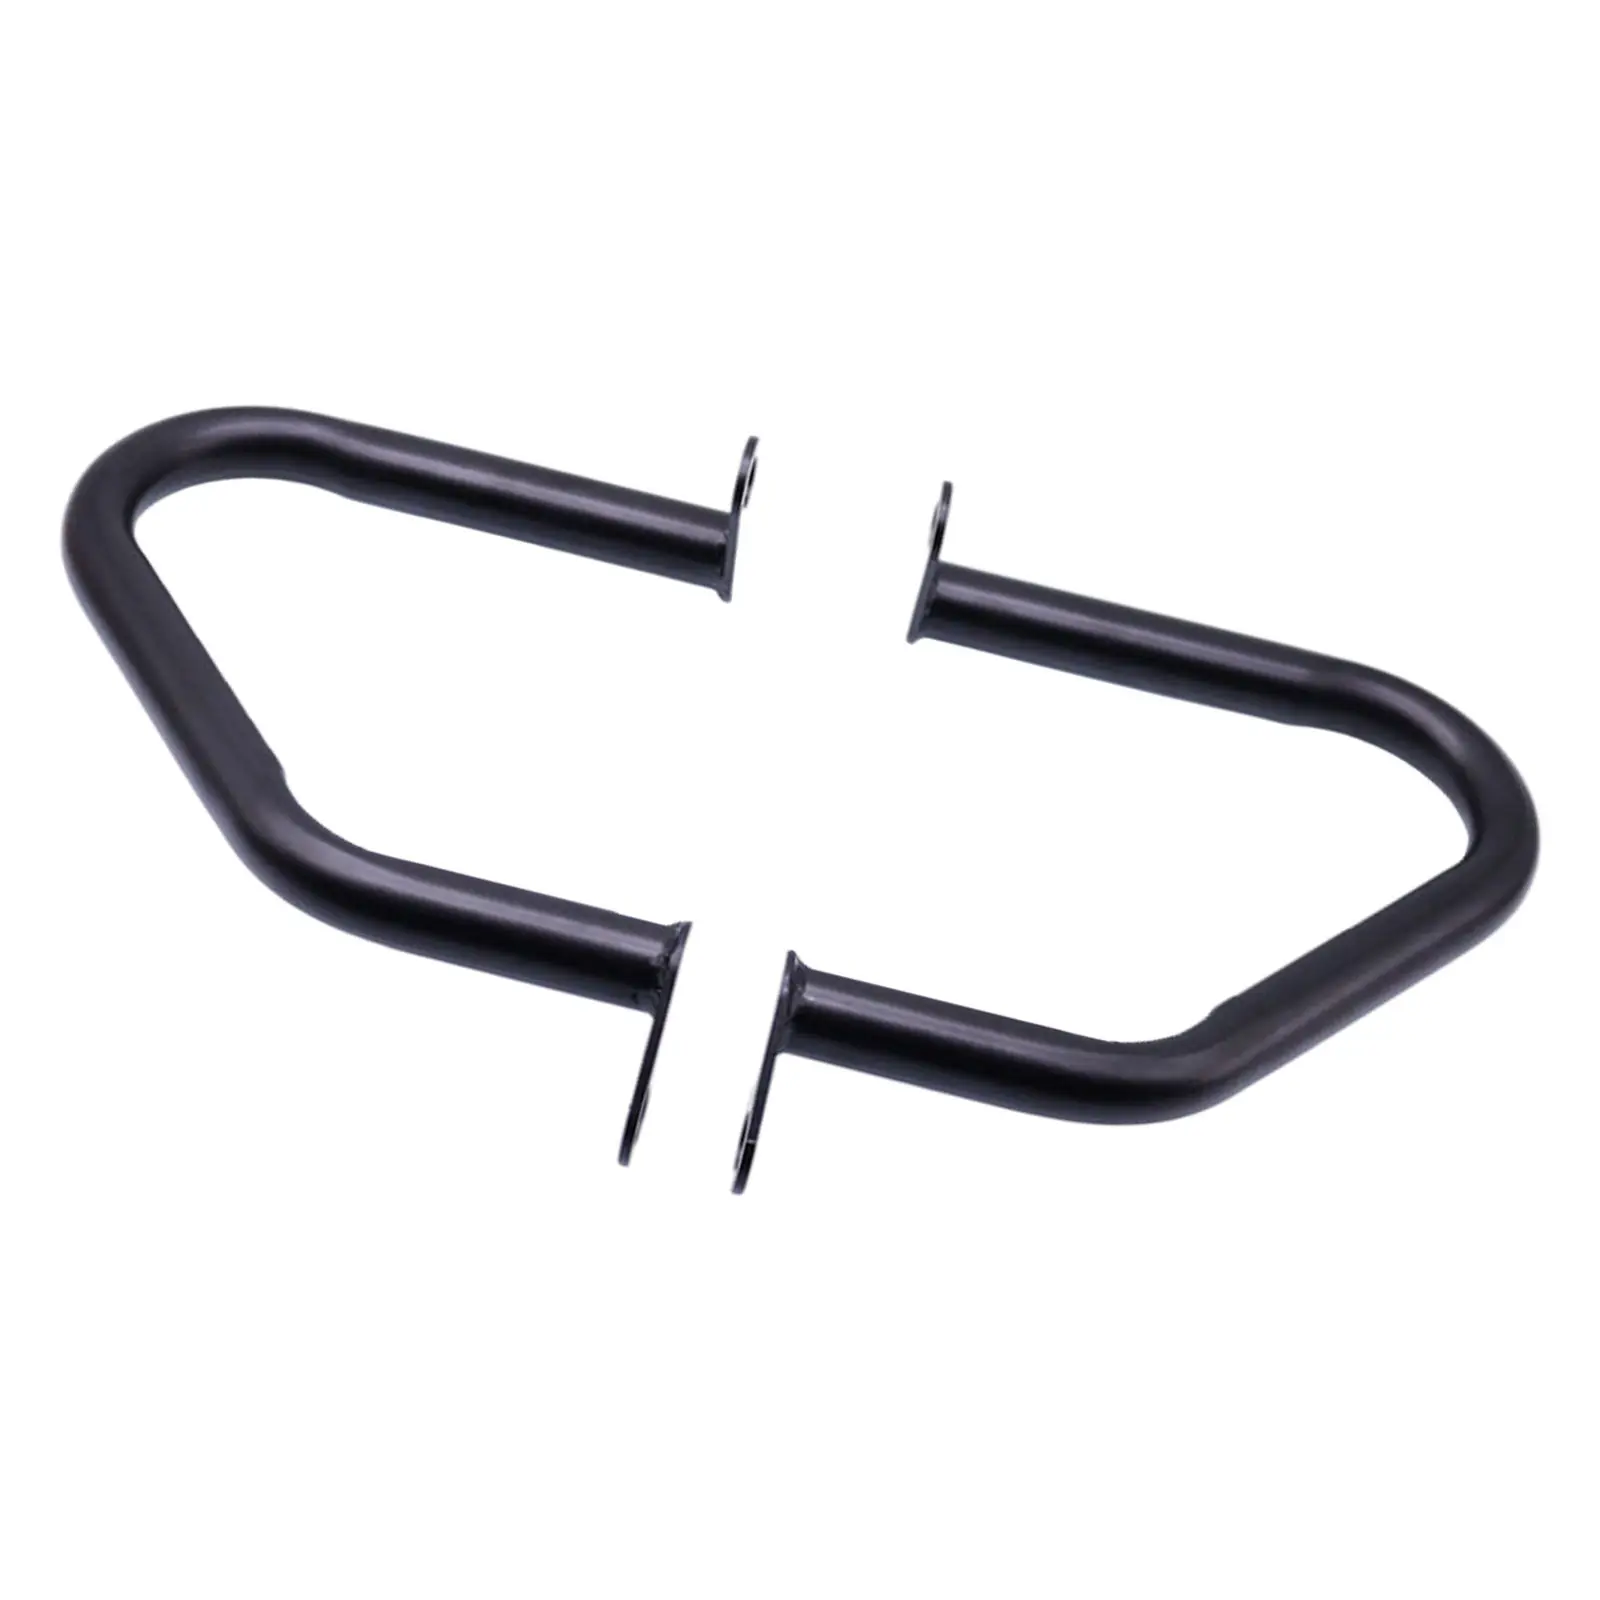 Engine Guard Crash Bars Replaces for T120 Thruxton Durable Professional